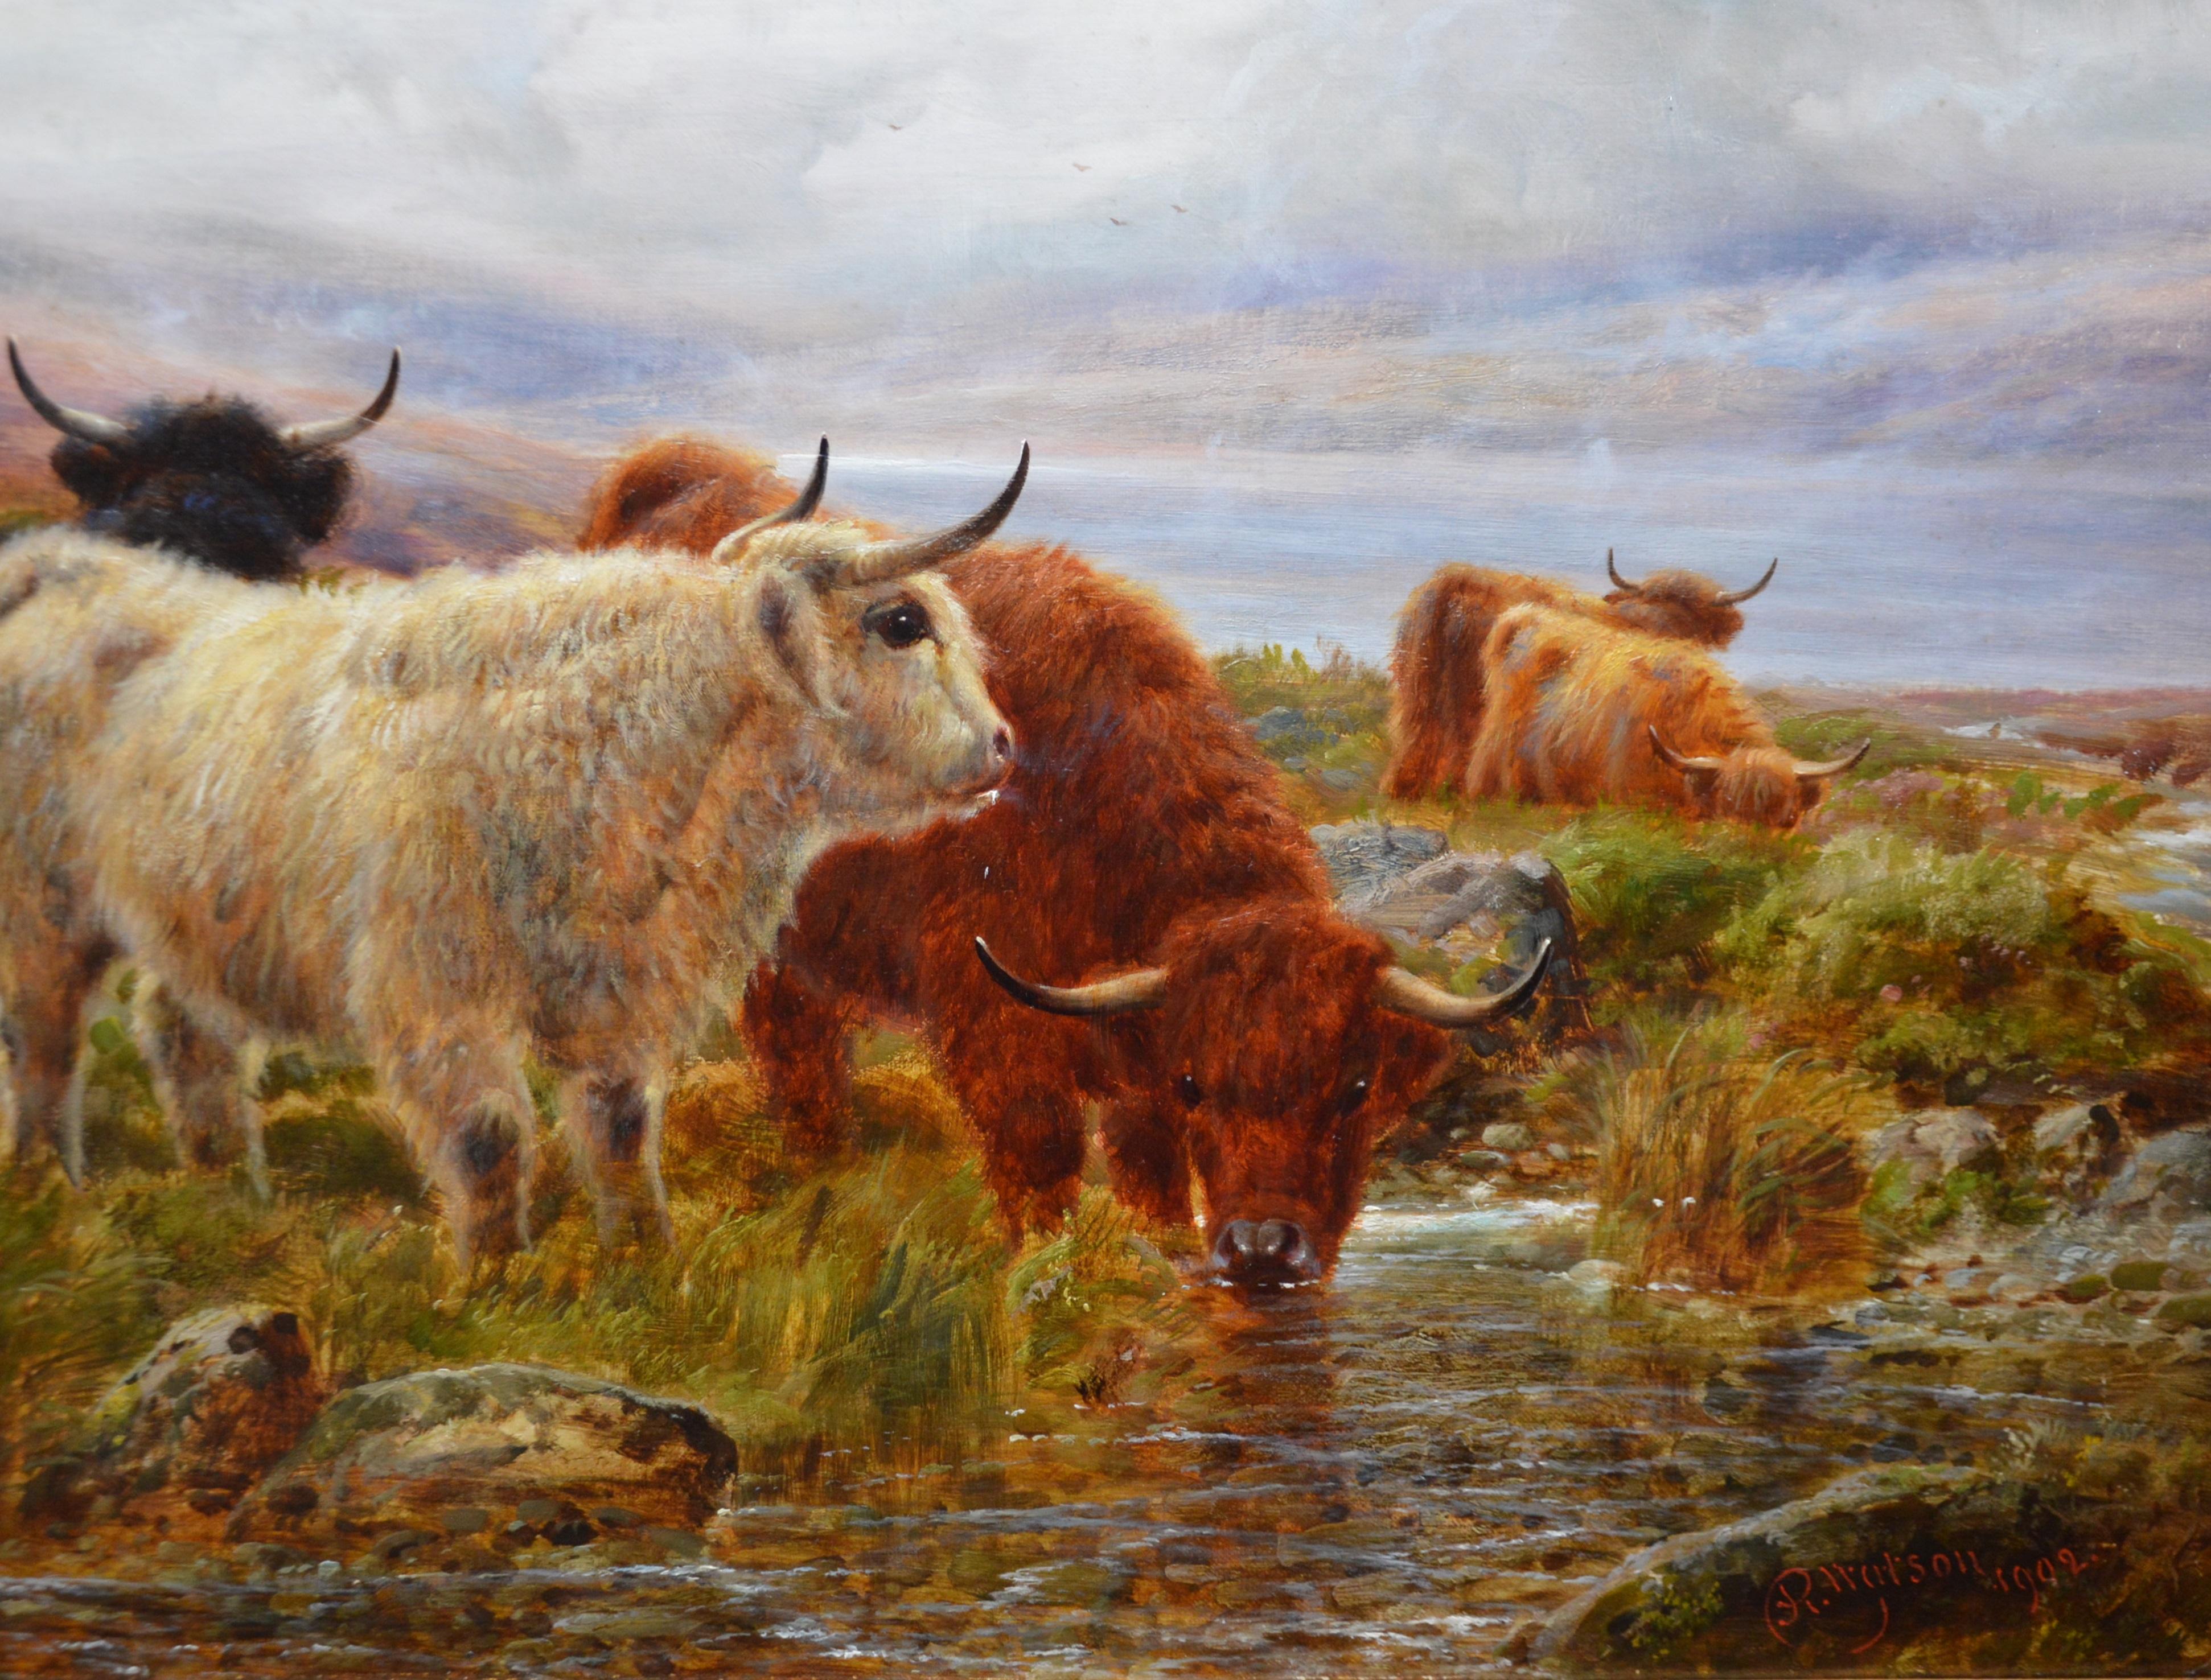 ‘The Banks of Loch Lomond’ by Robert Watson (1855-1920). The painting, which depicts a herd of Highland cattle watering in the Highlands of Scotland, is signed by the artist and dated 1902. It hangs in a newly commissioned gold metal leaf frame of